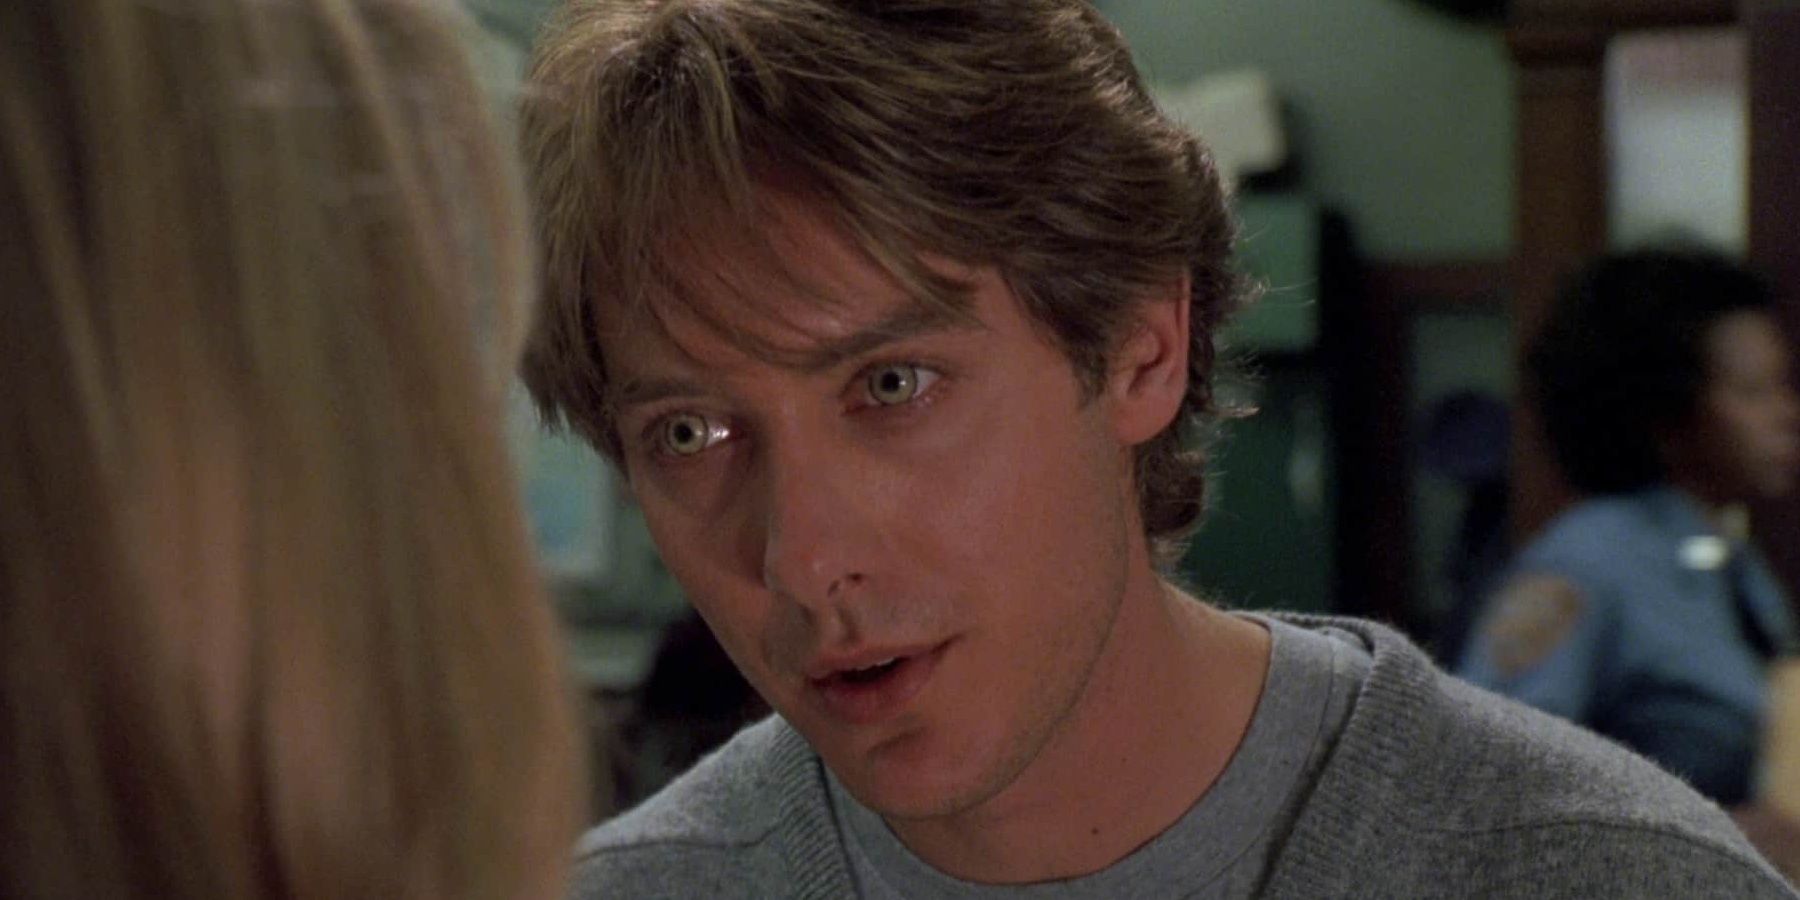 James Spader with glossy eyes looking at a woman in a scene from Wolf.